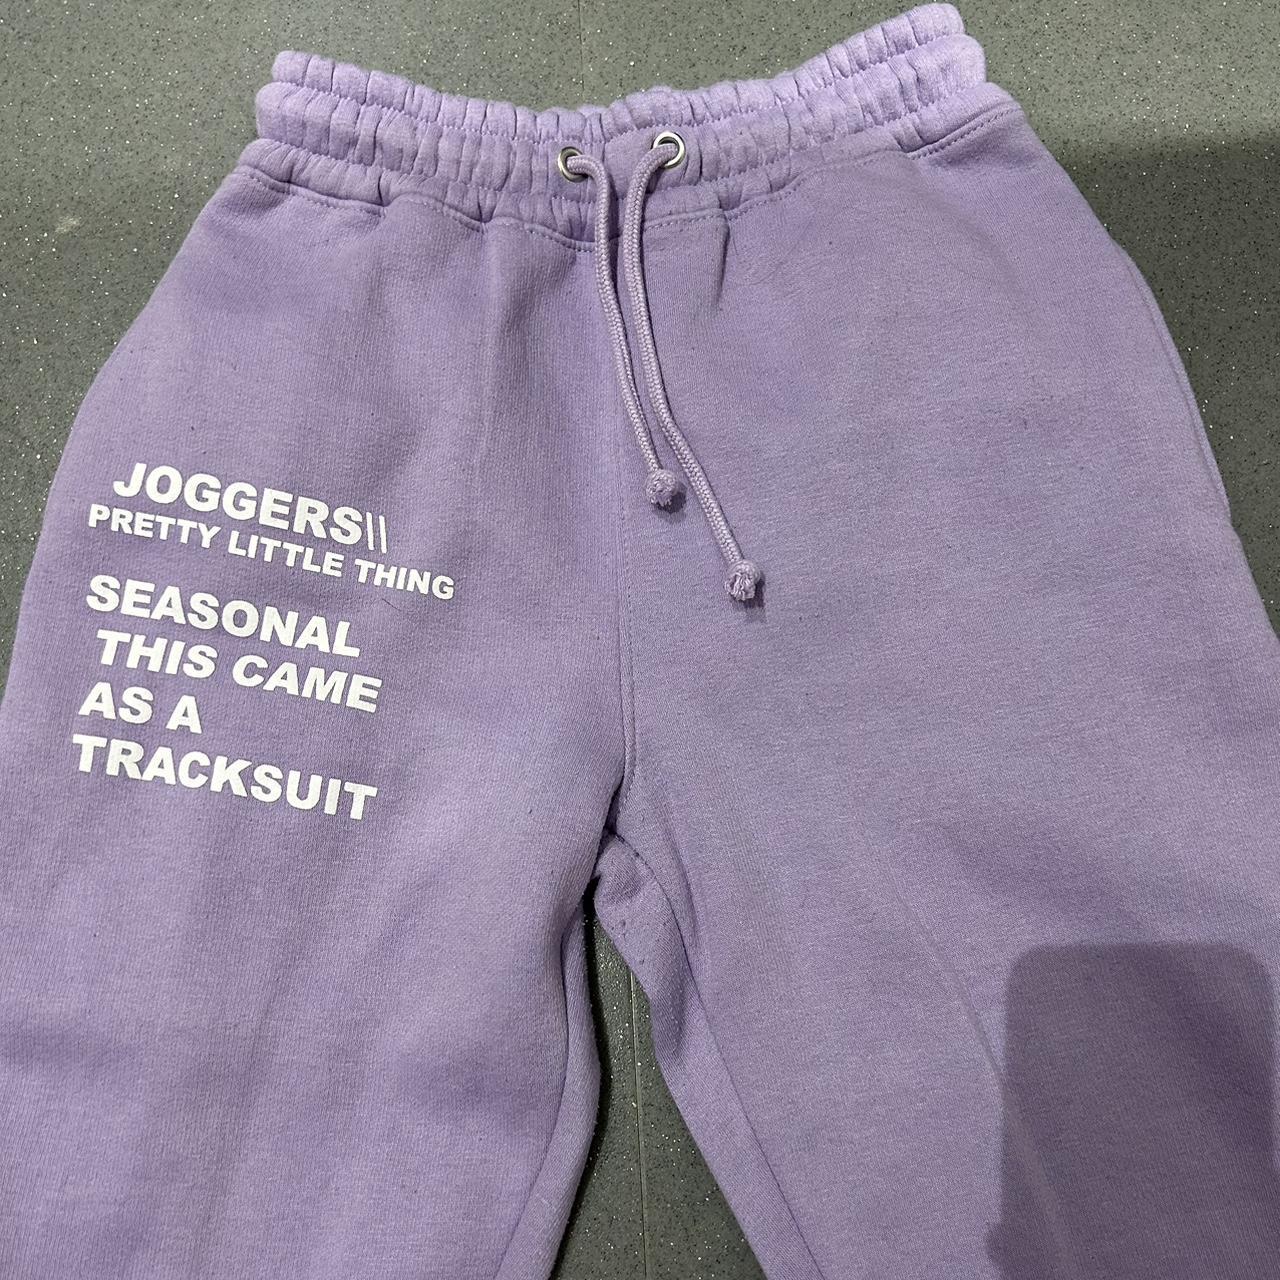 PrettyLittleThing Women's Purple and White Joggers-tracksuits | Depop